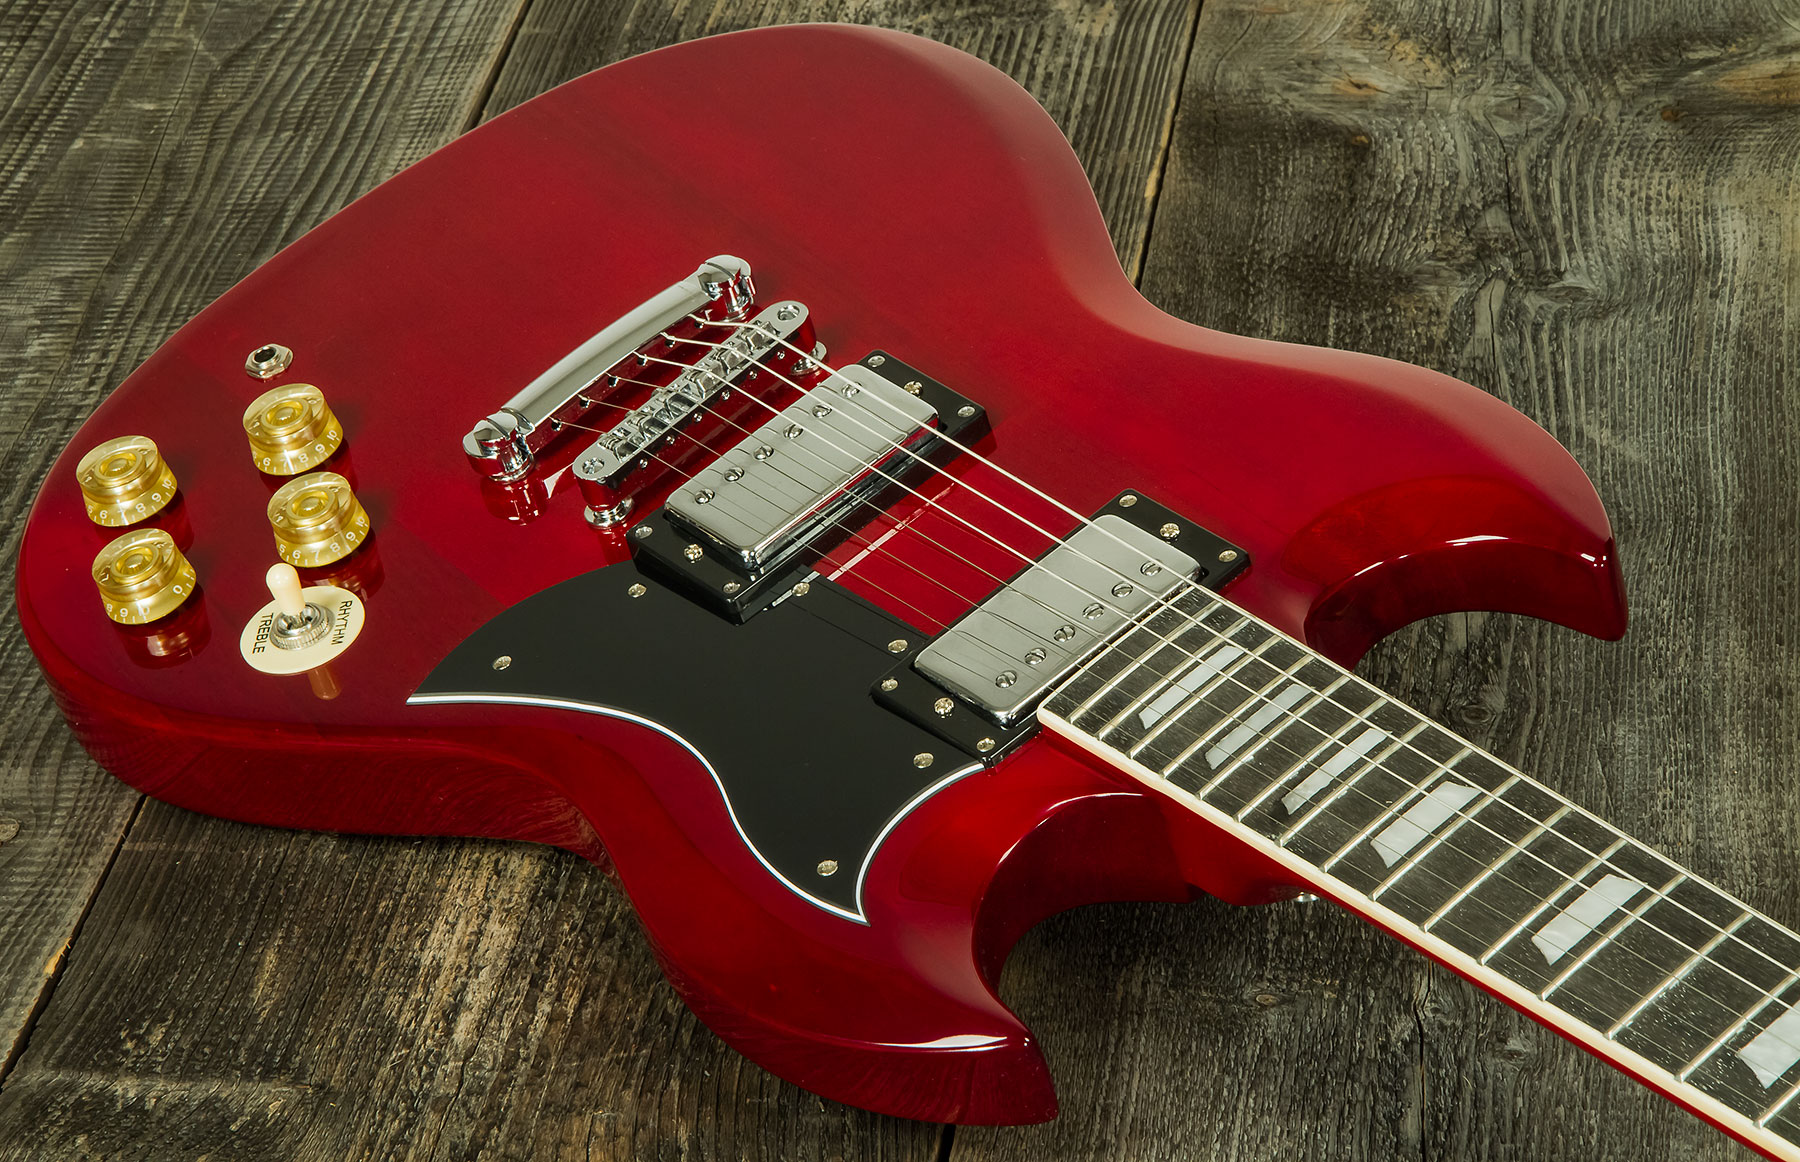 Eastone Sdc70 Hh Ht Pur - Red - Double cut electric guitar - Variation 1